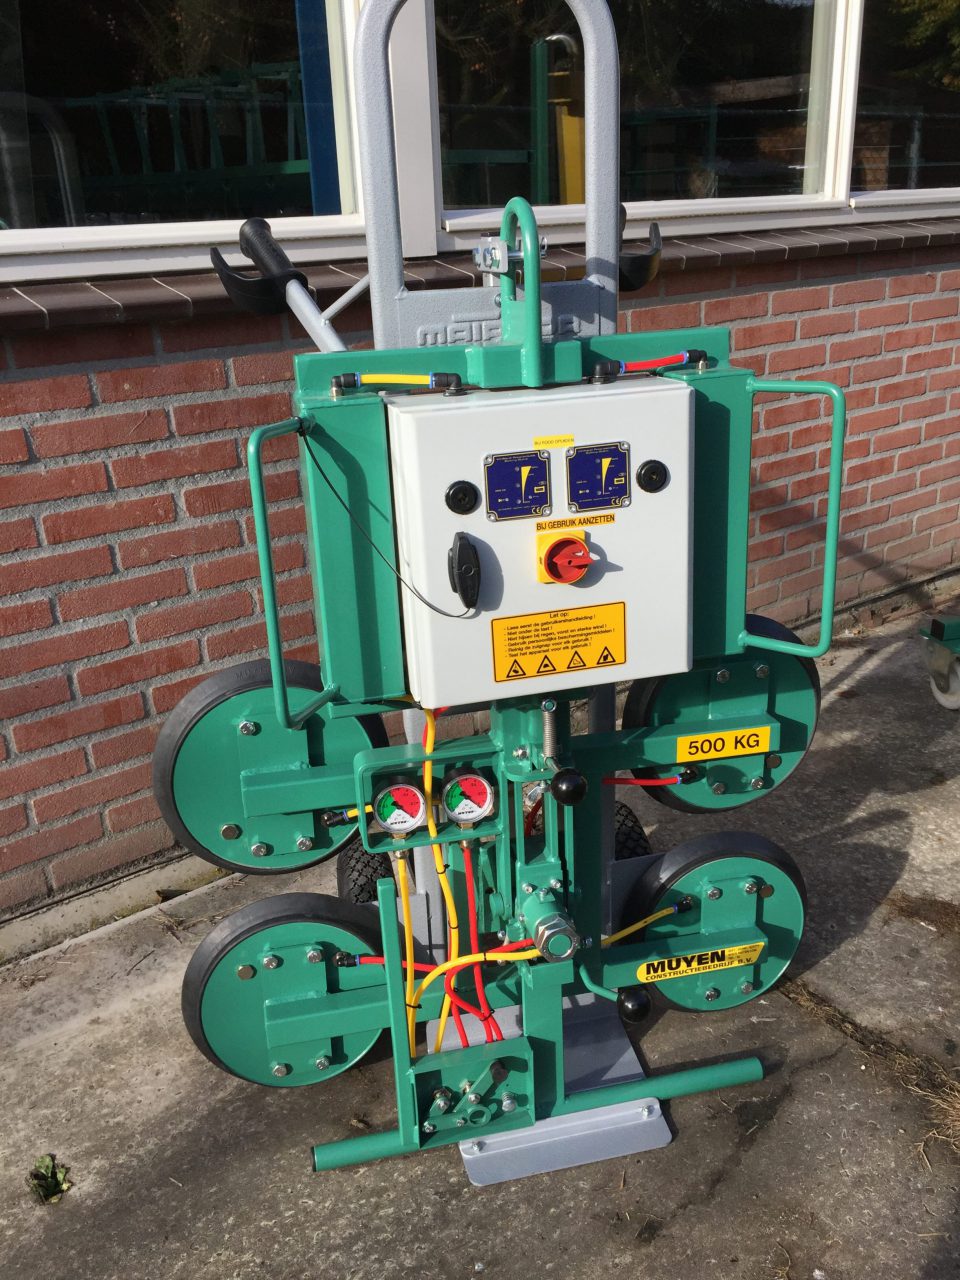 Twin500 vacuum lifter Muyen, safety 3* dual systeem 500 kg turn and tilt